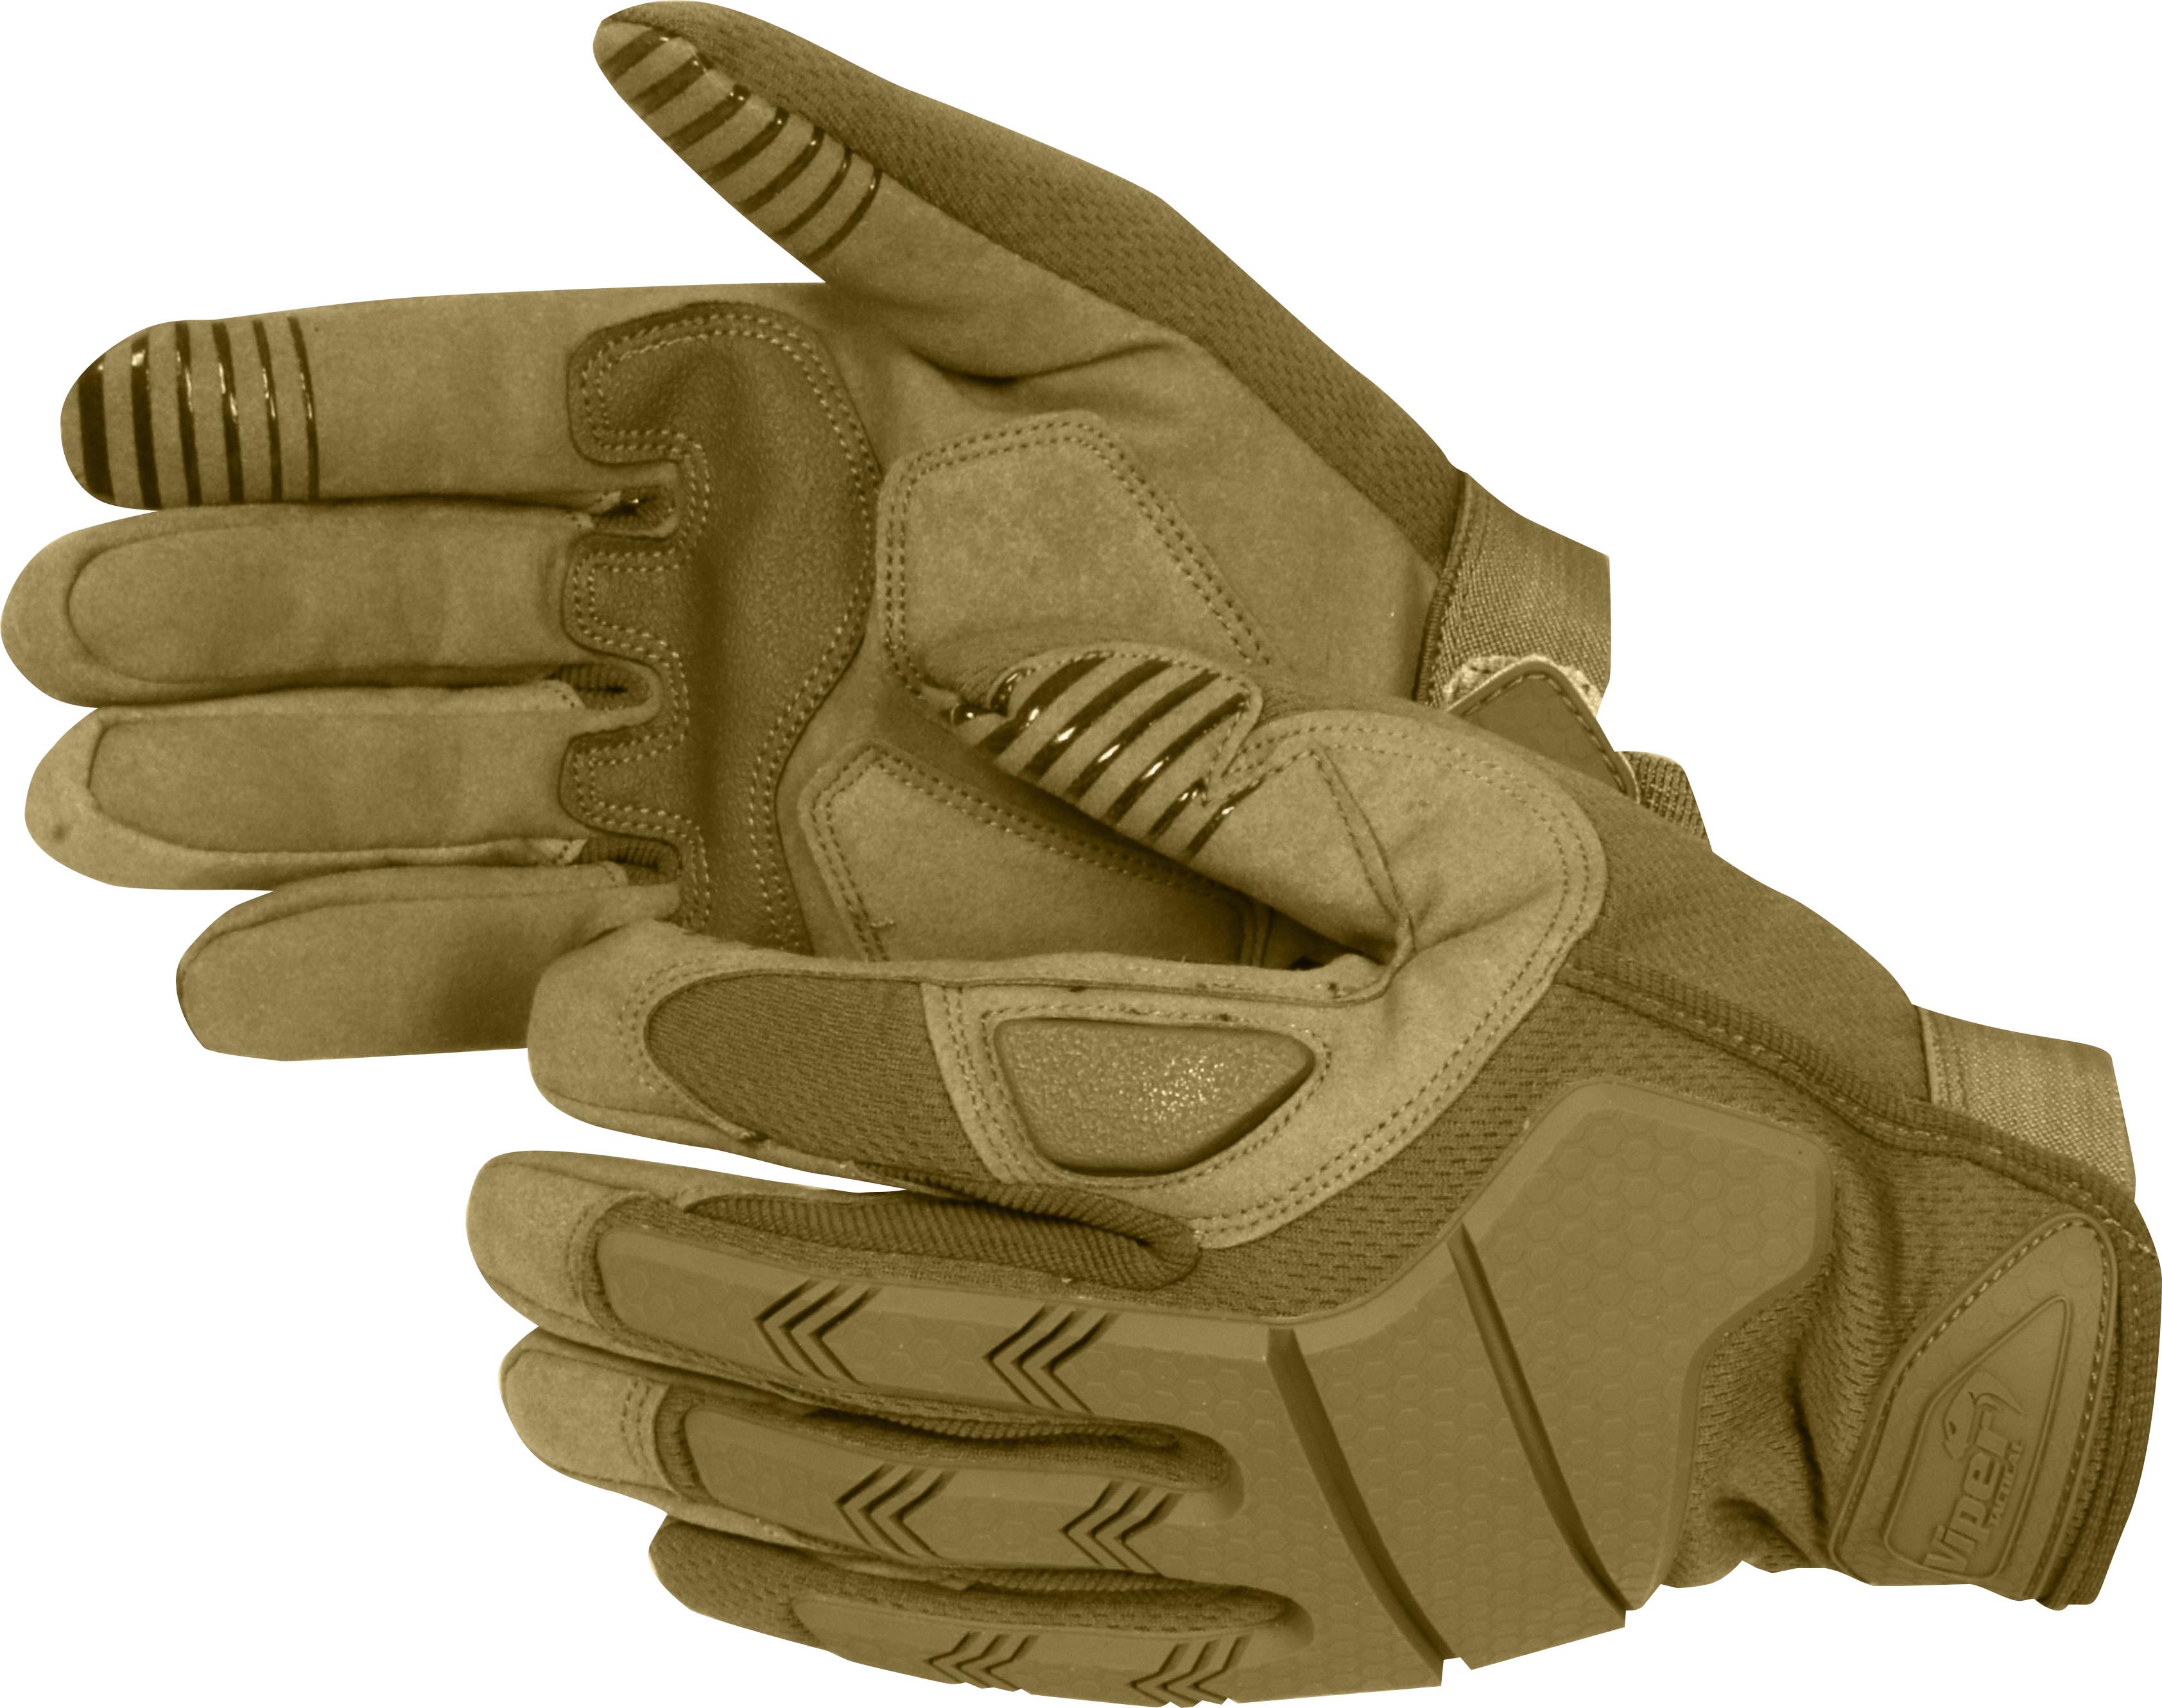 Viper Tactical Recon Gloves - Coyote